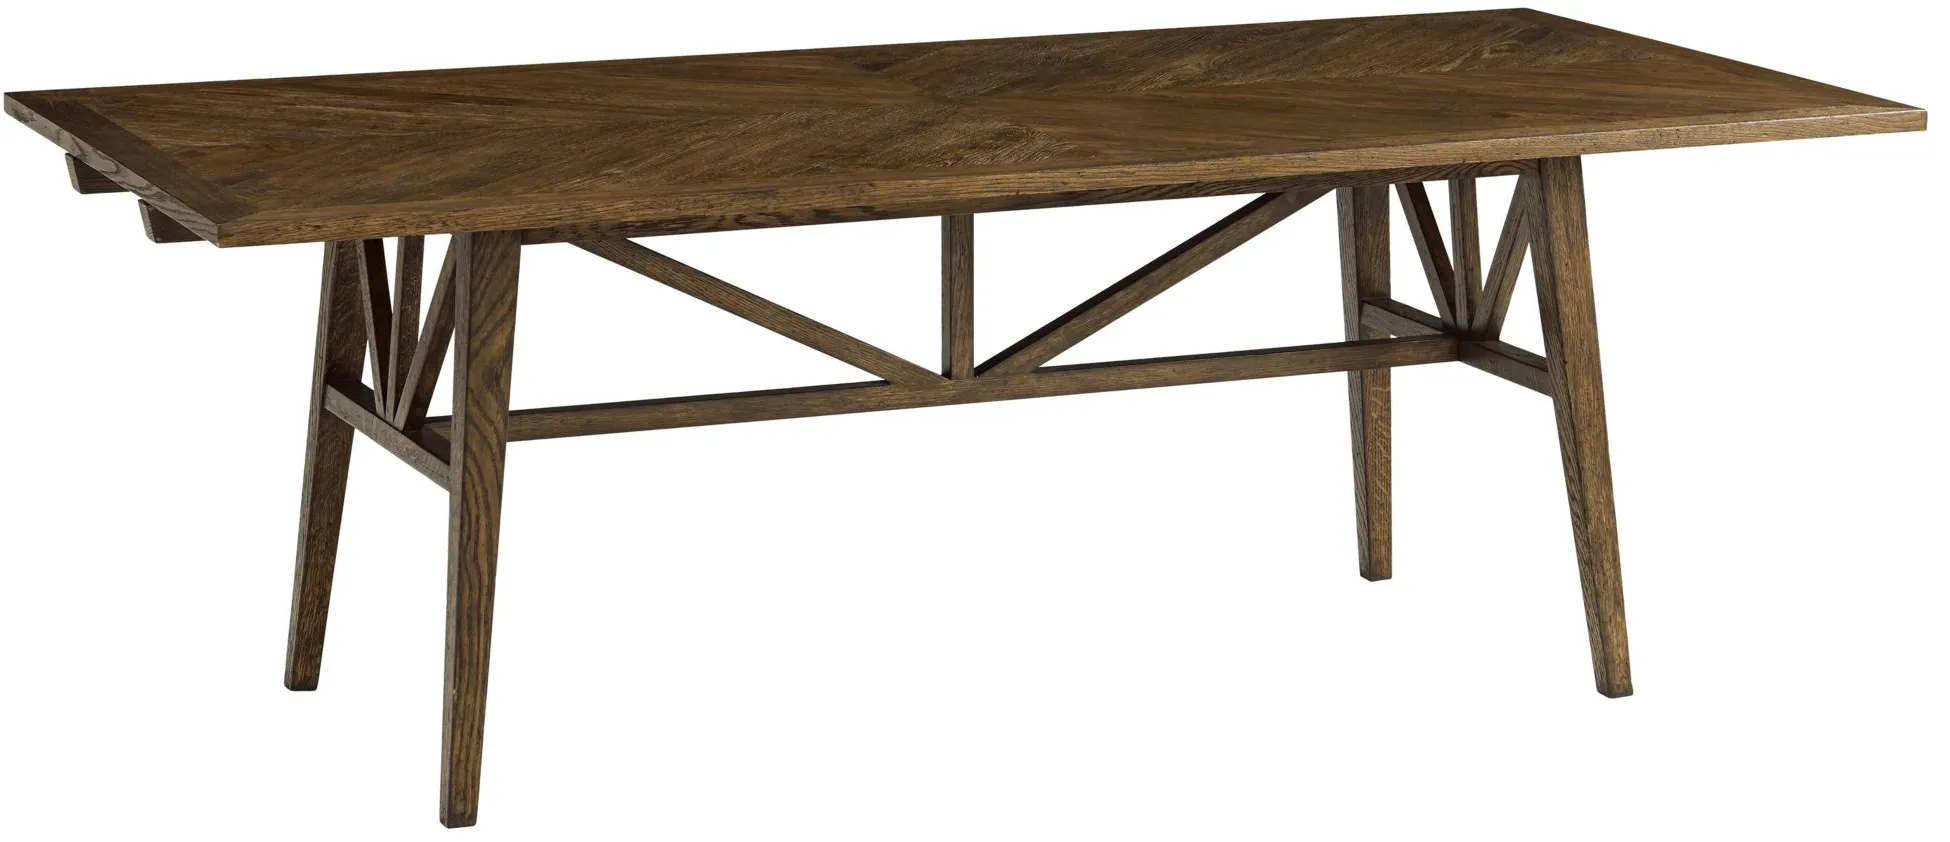 Nova Extending Dining Table in Dusk by Theodore Alexander